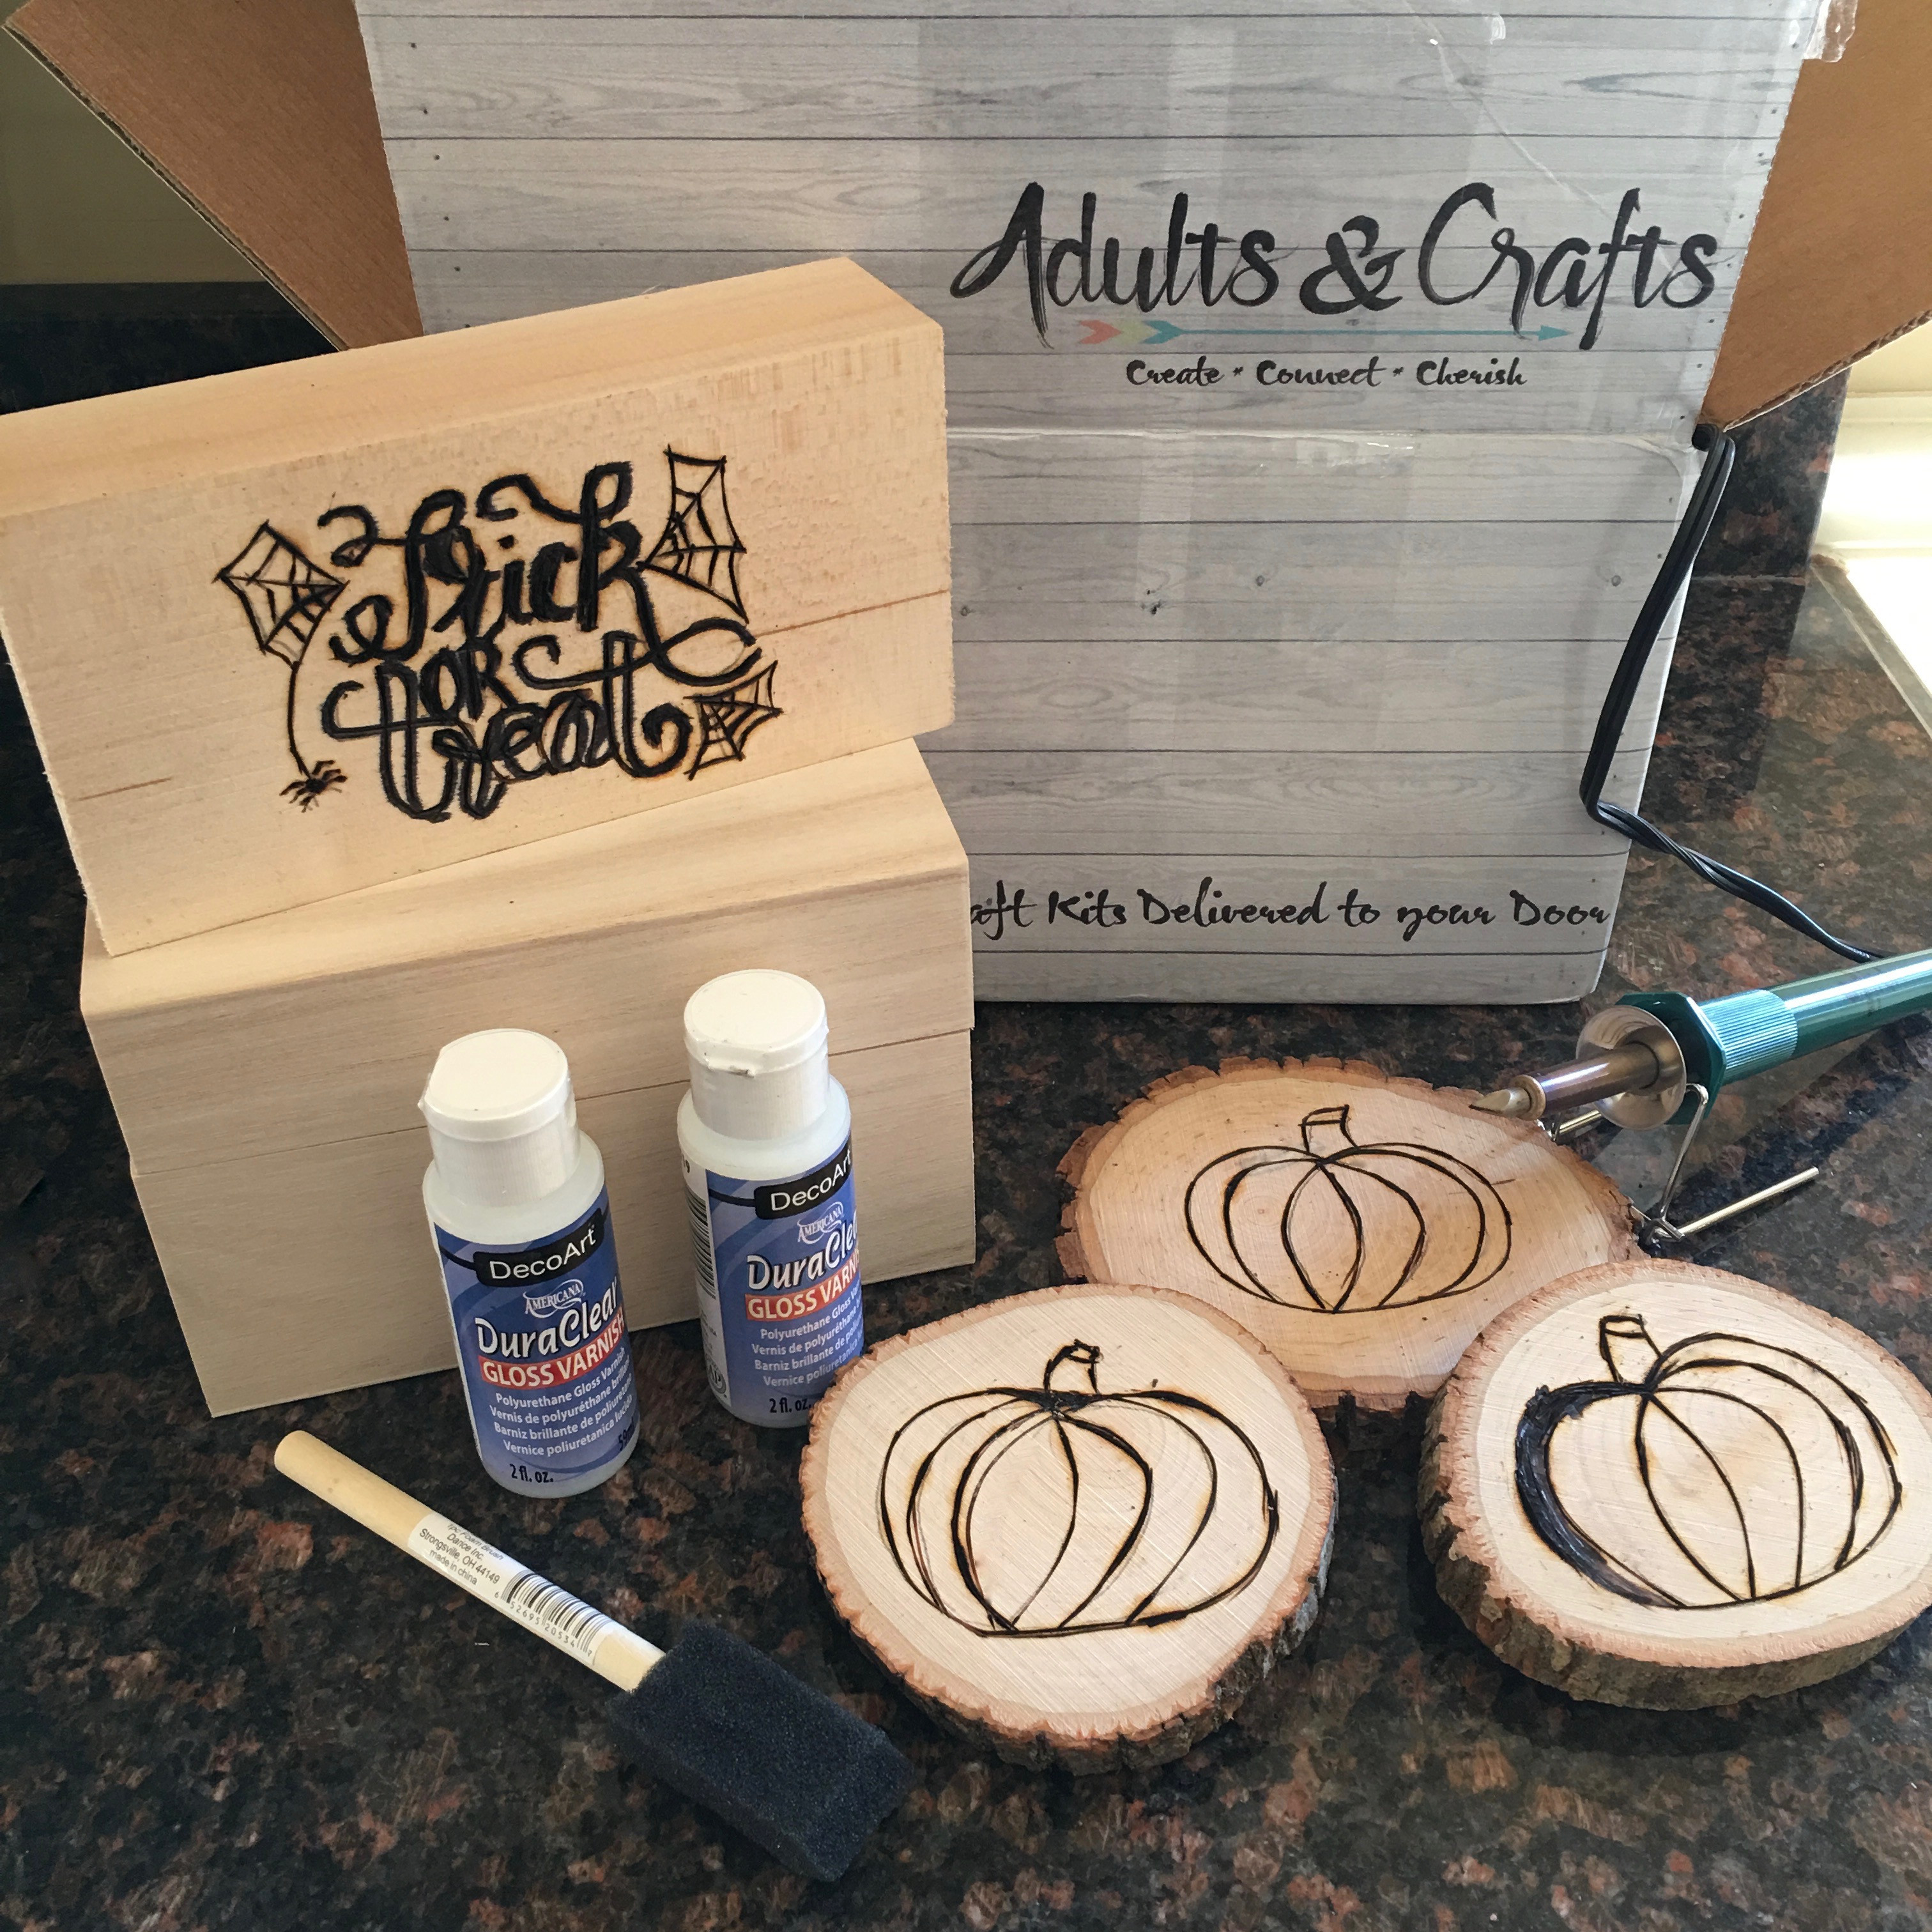 Wood Craft Kits For Adults
 Adults & Crafts Review Wood Burning 3 Pack Kit